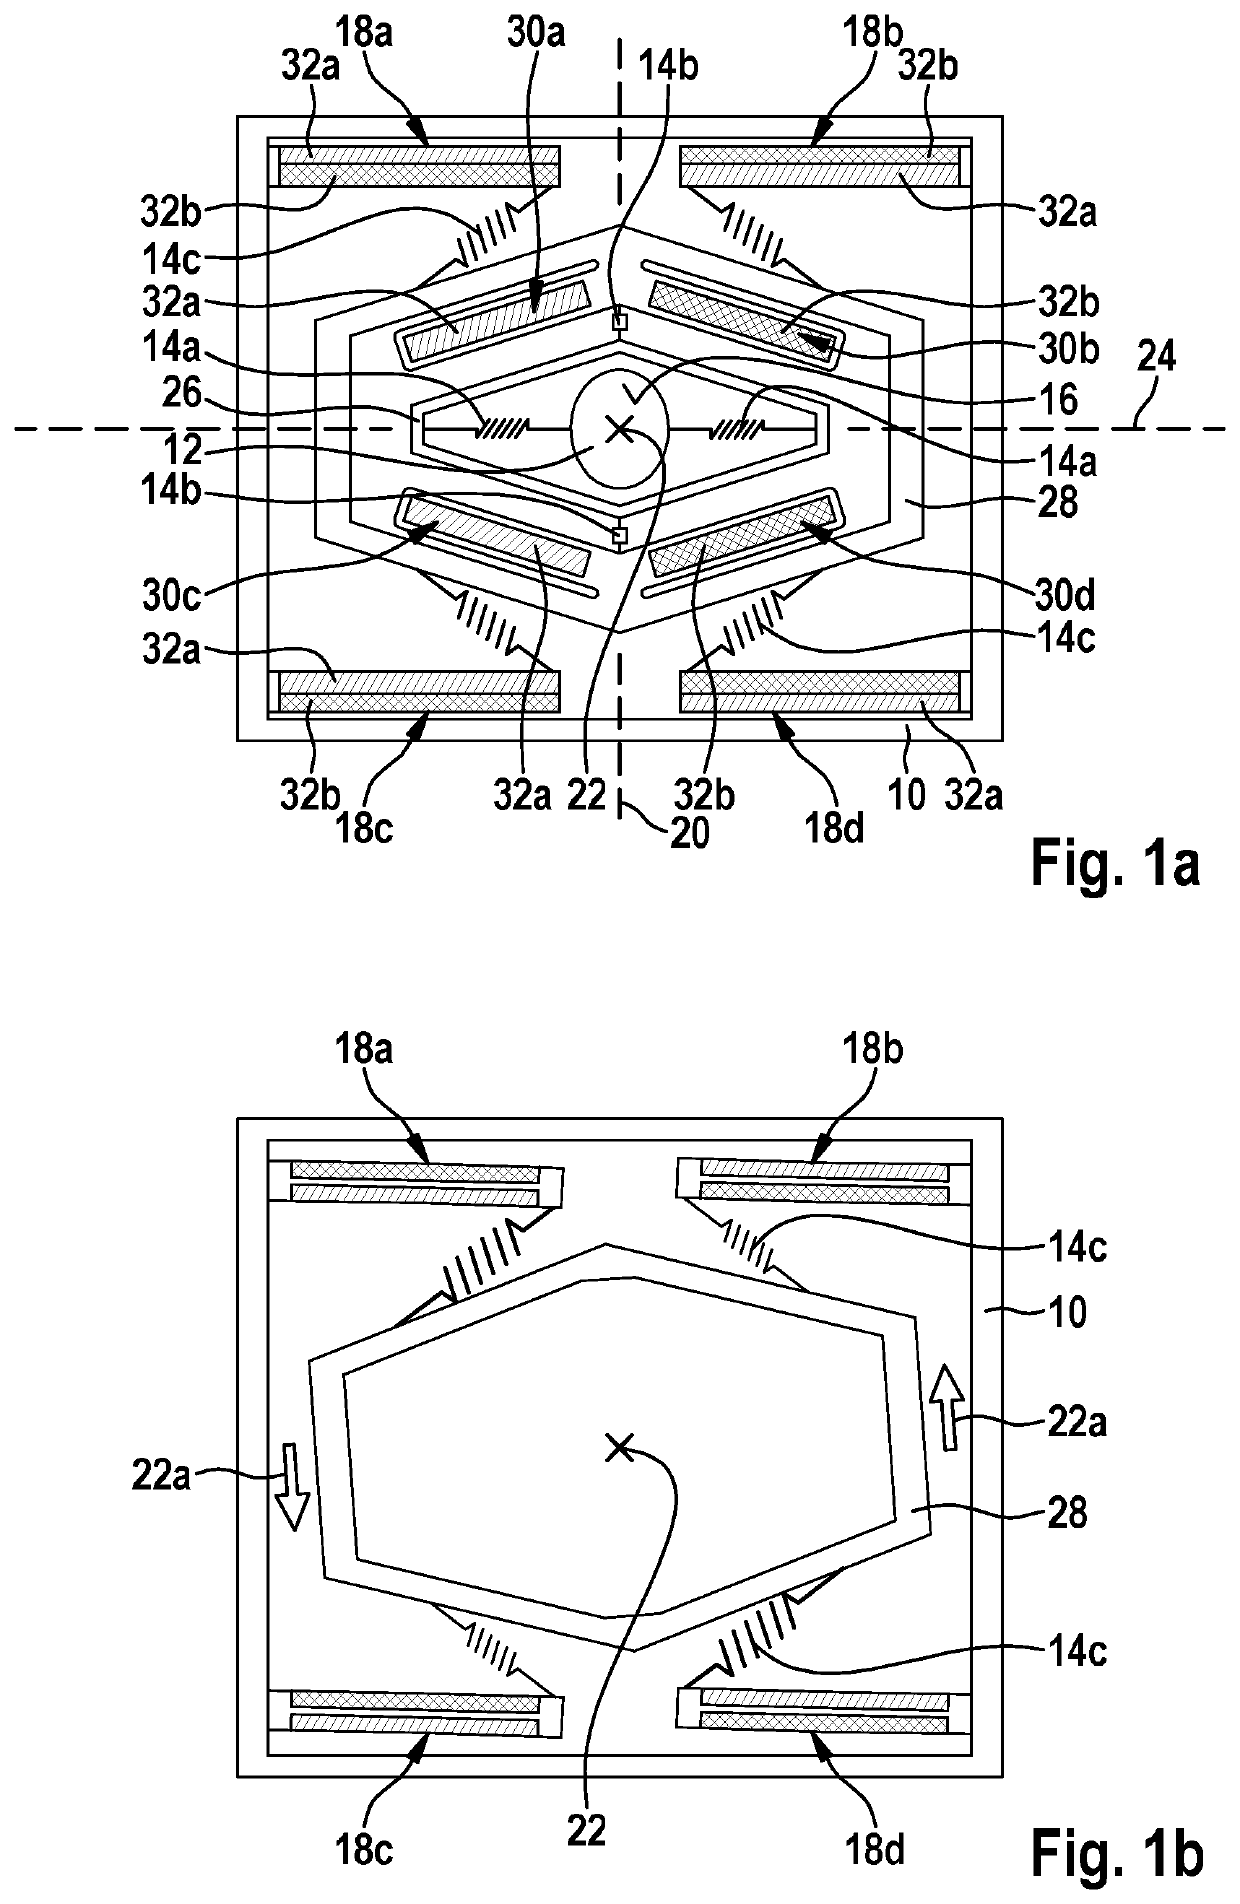 Micromechanical component, method for manufacturing a micromechanical component, and method for exciting a movement of an adjustable part about a rotational axis